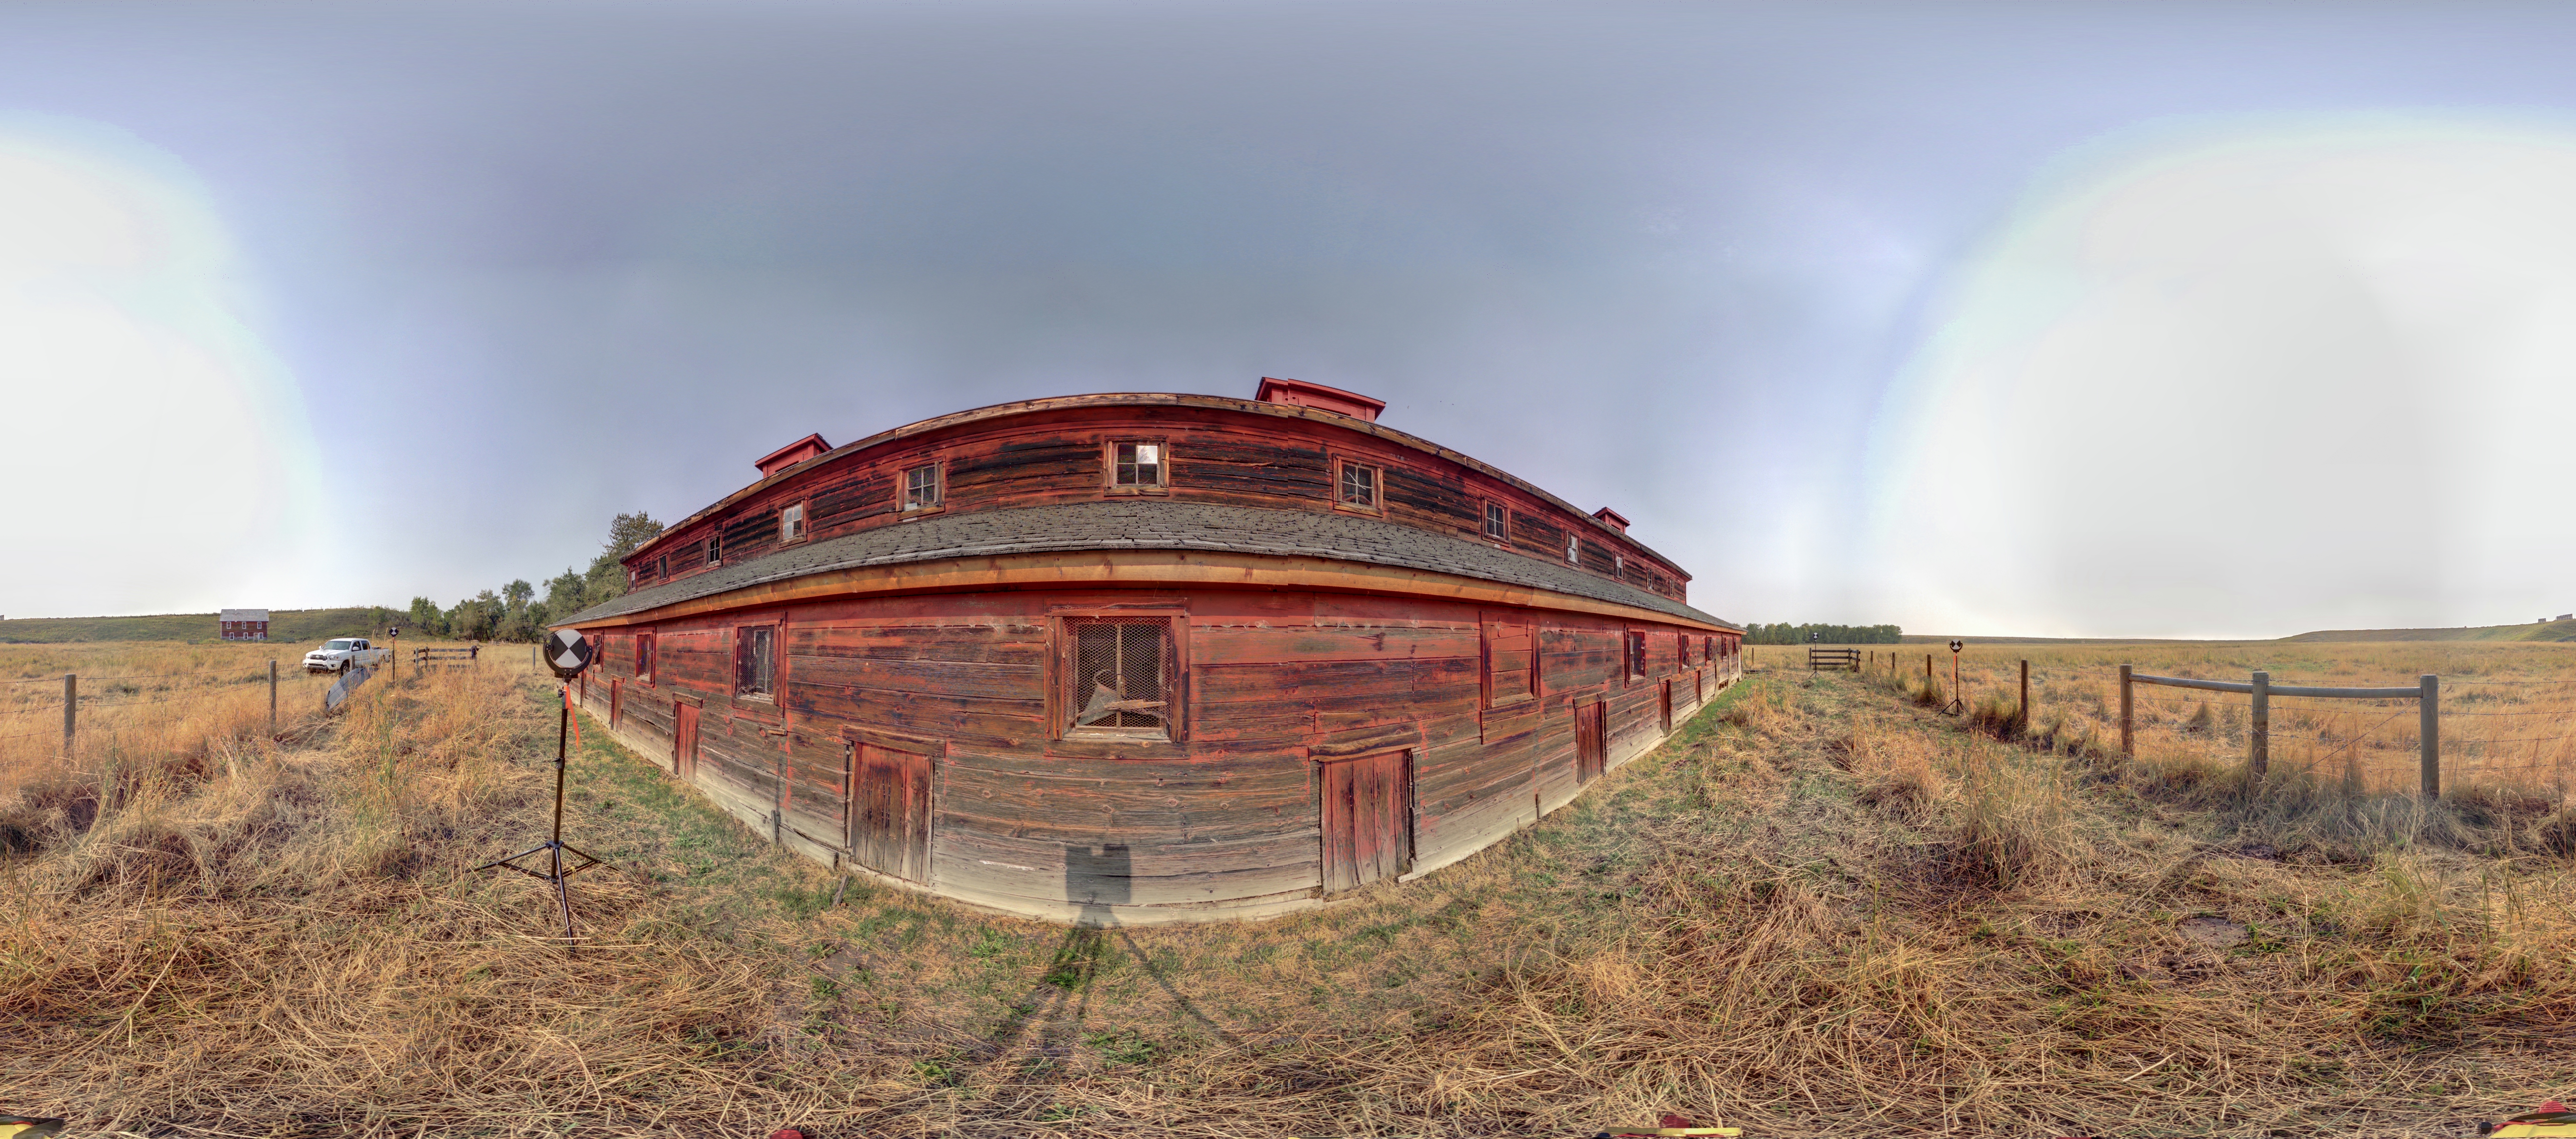 Panoramic image from scan location 6 of the exterior of the Piggery at Bar U Ranch